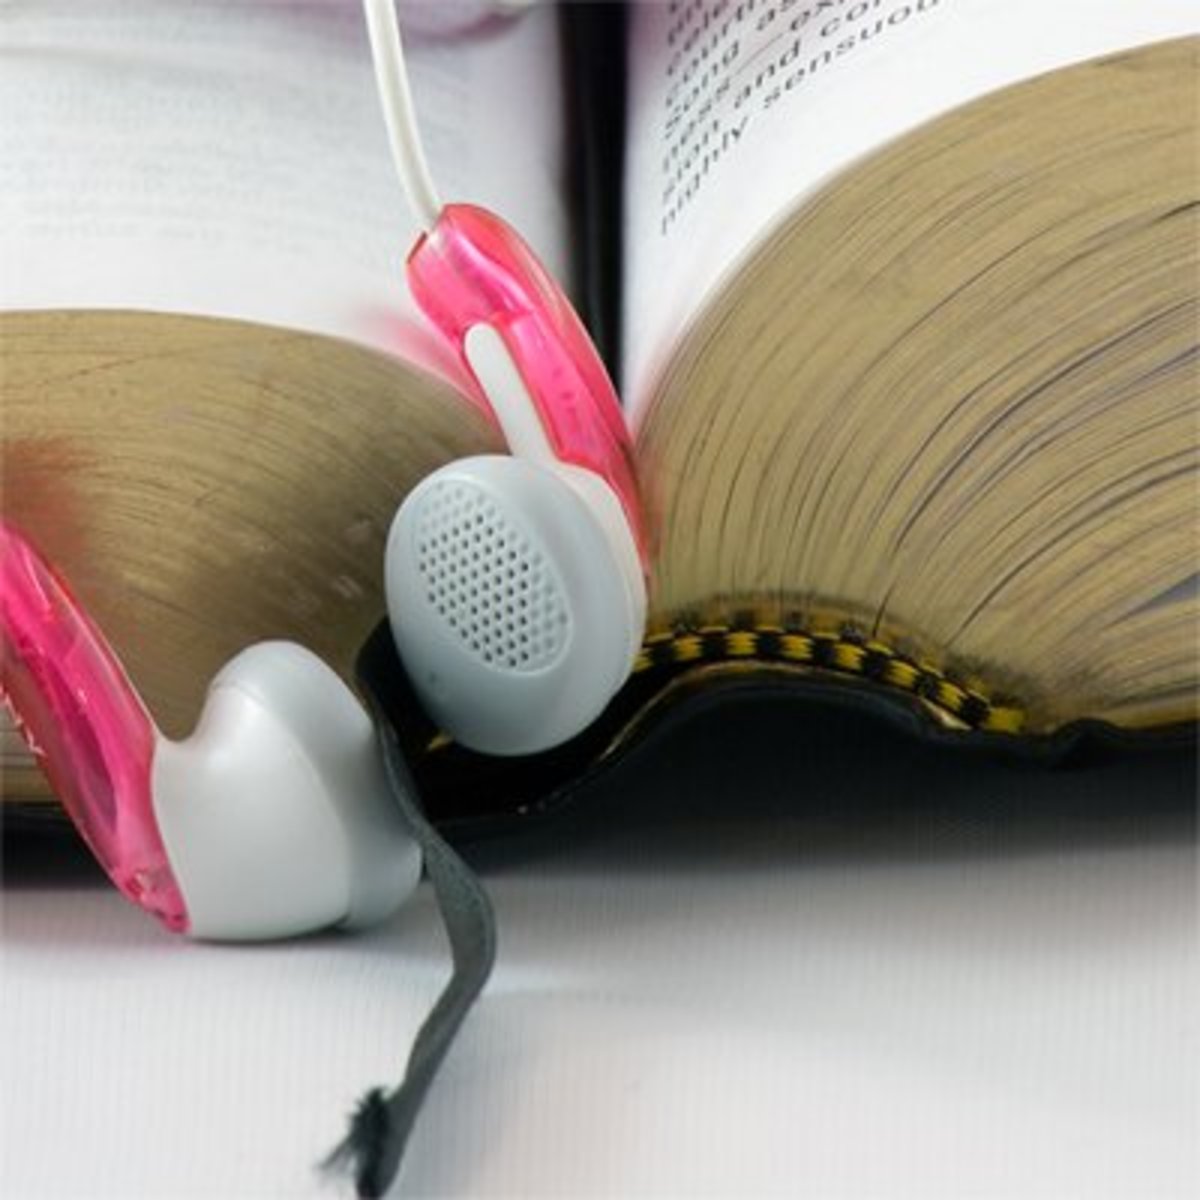 Book and earbuds